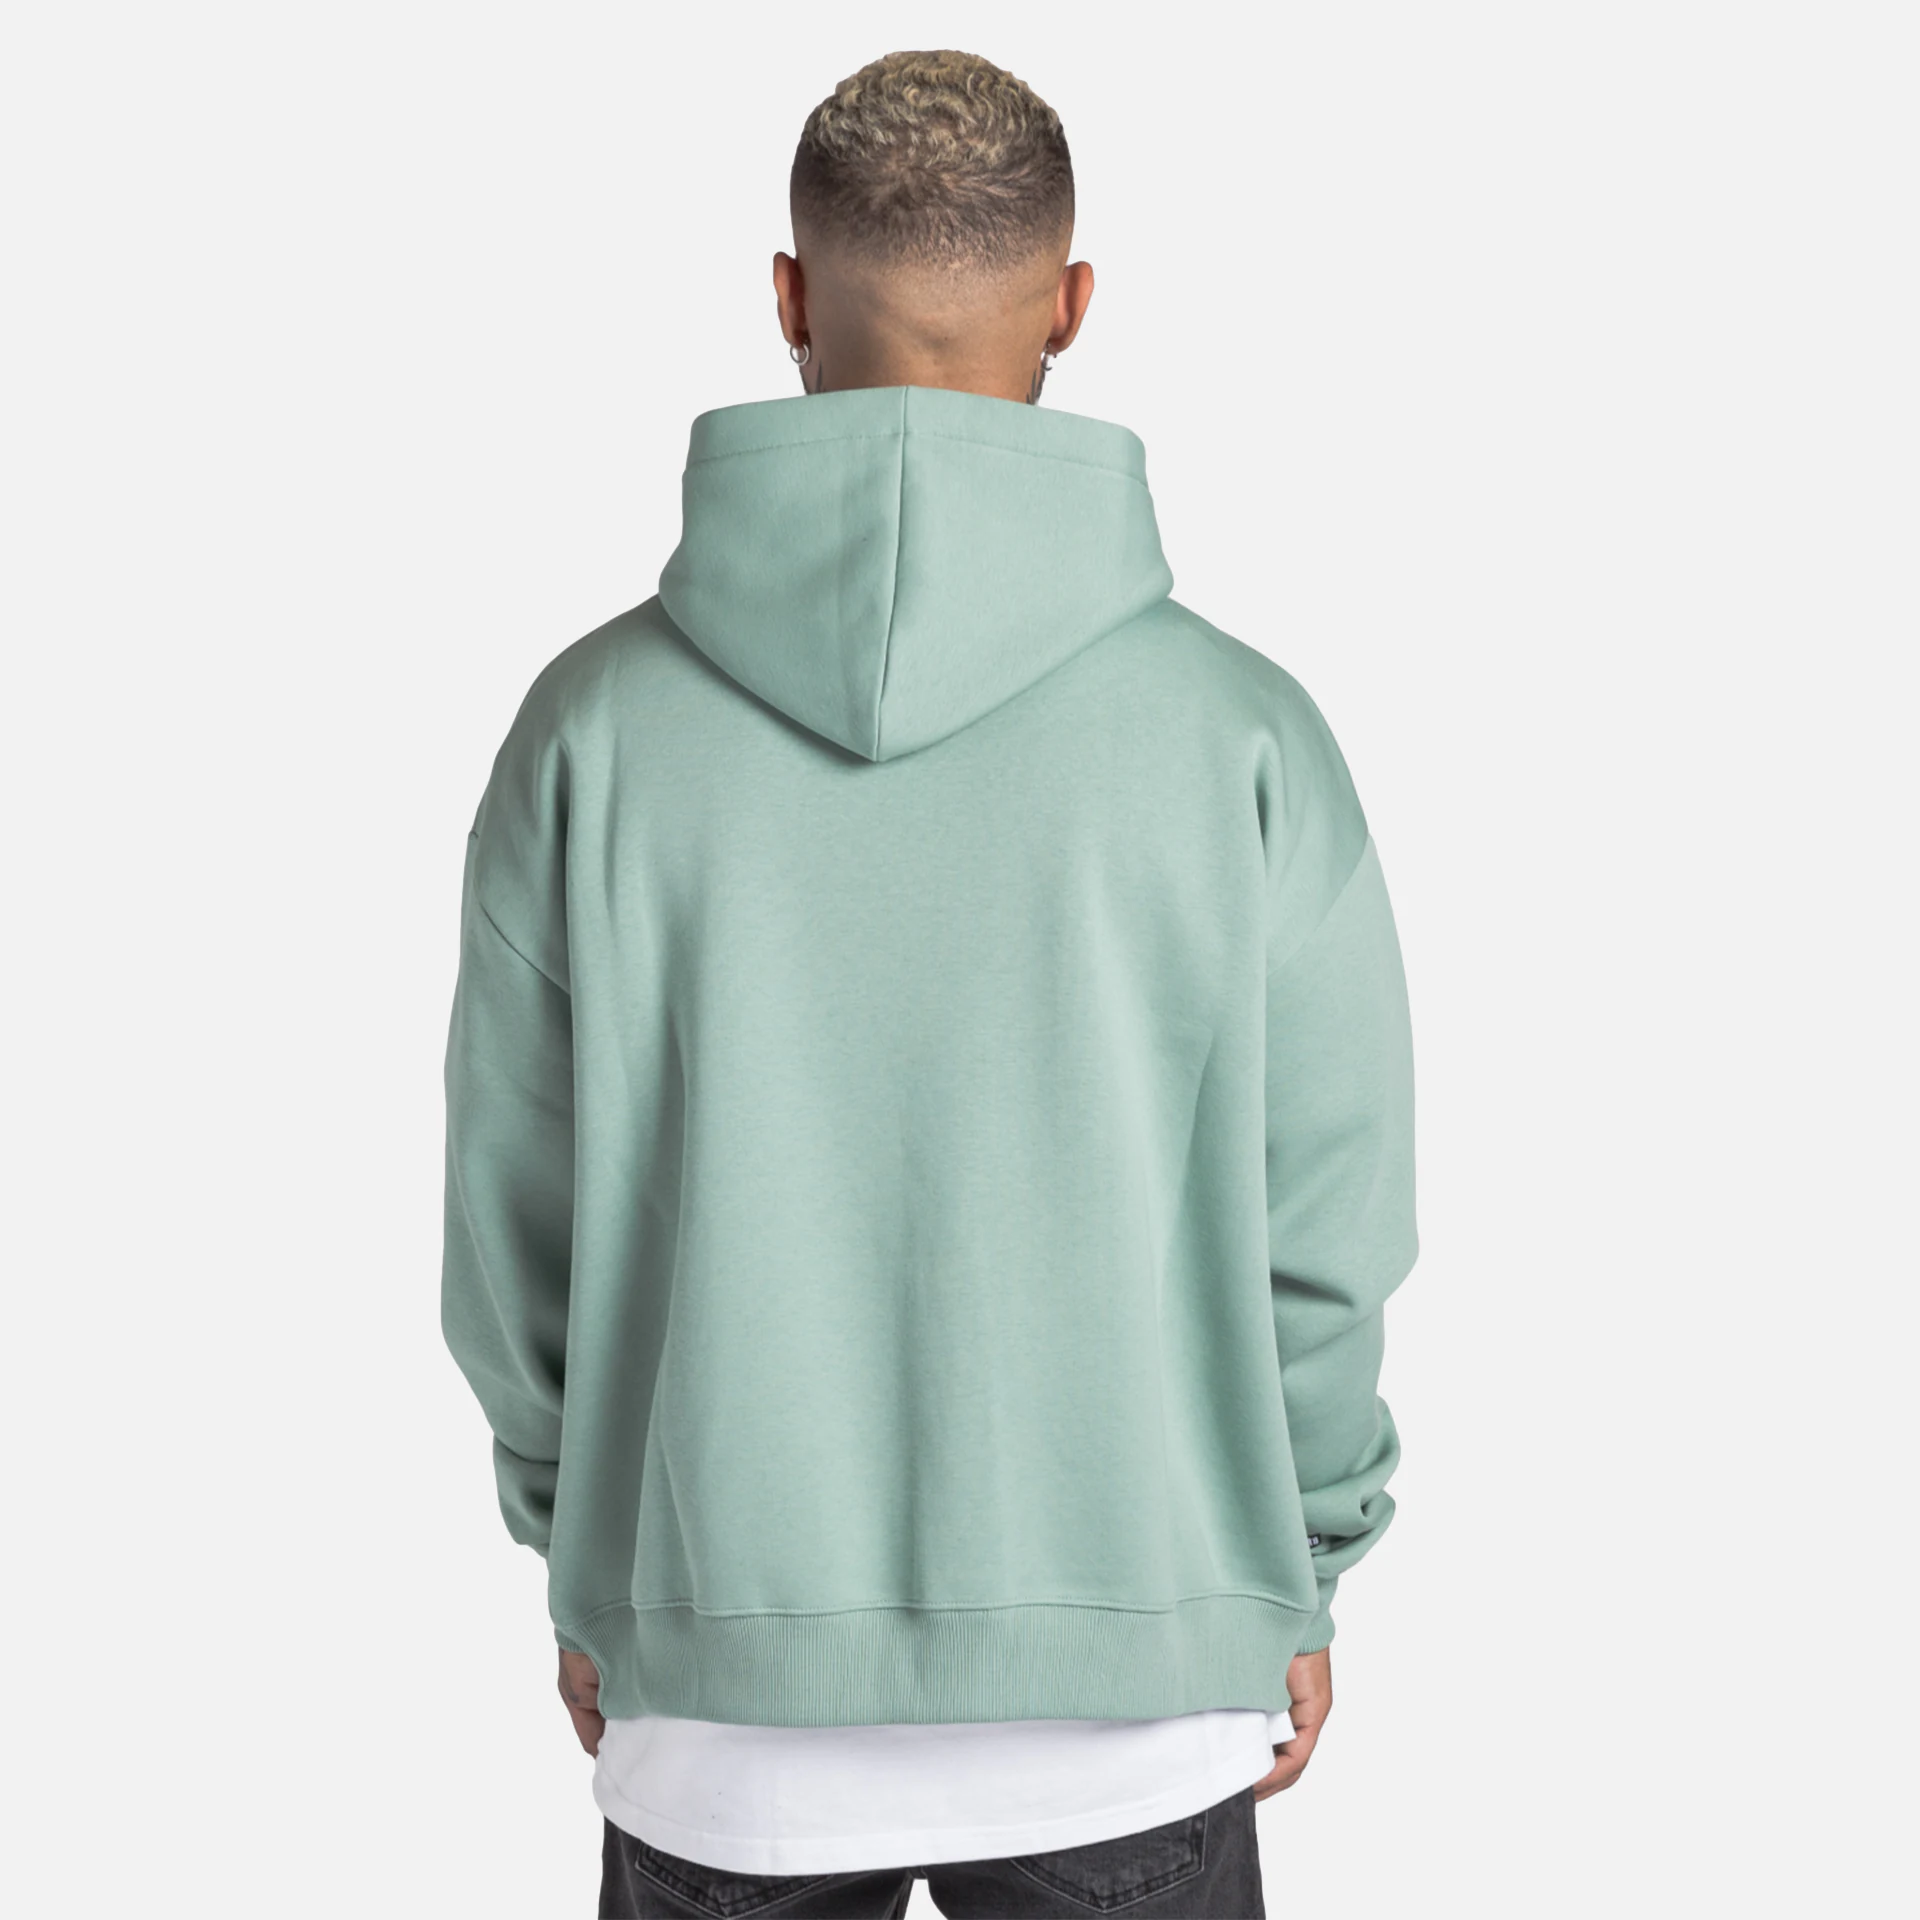 Fast and Bright FAB Hoodie Mint